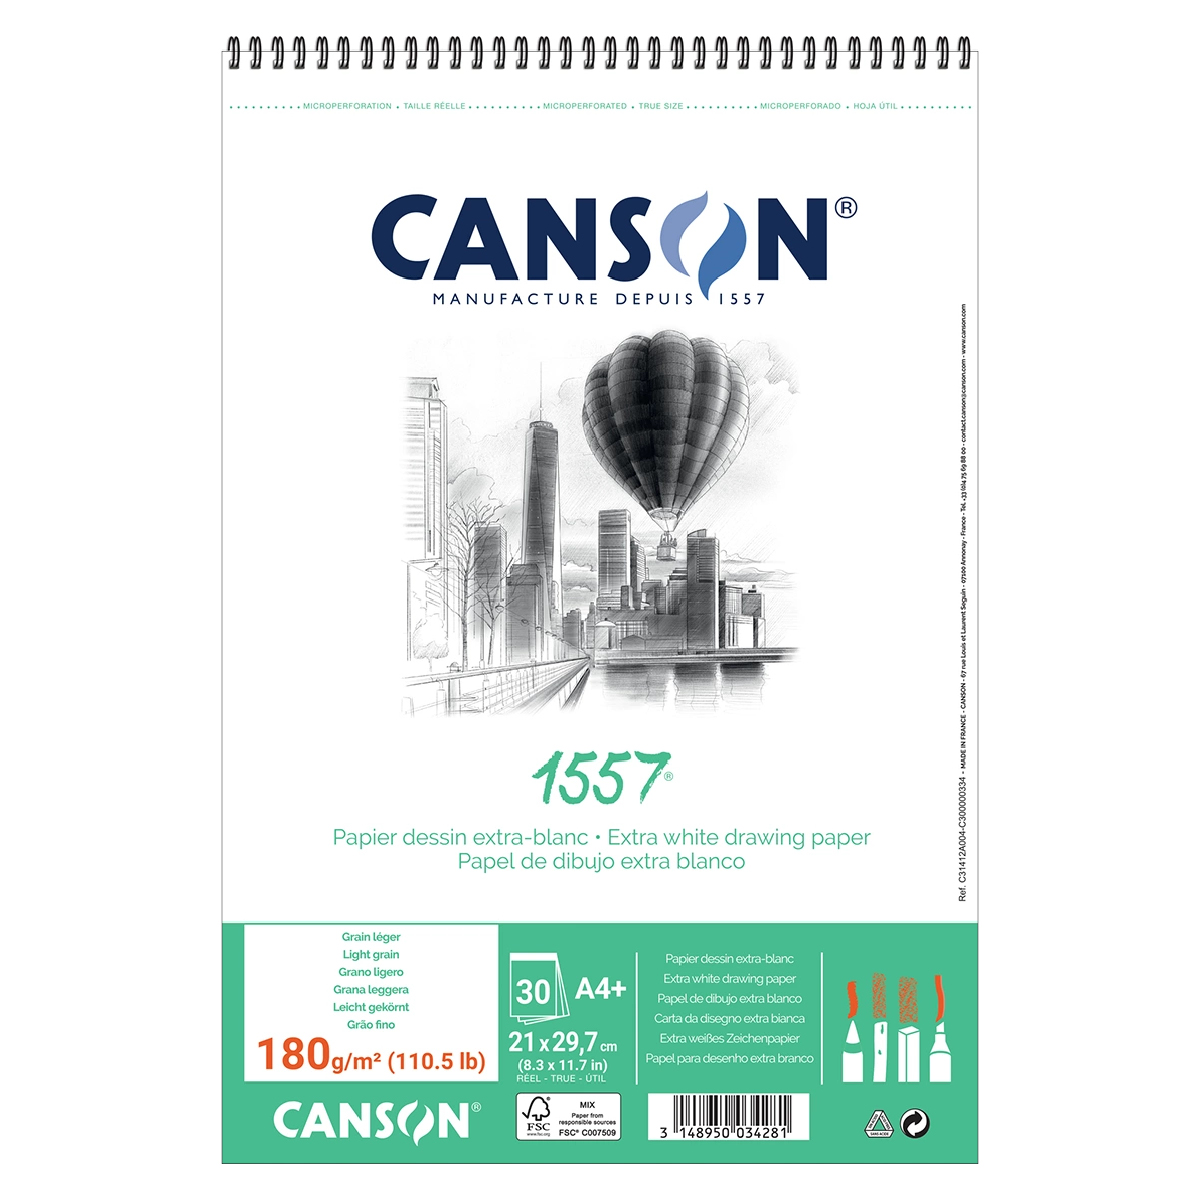 Canson XL Bristol Sketch Pad A4 made in France